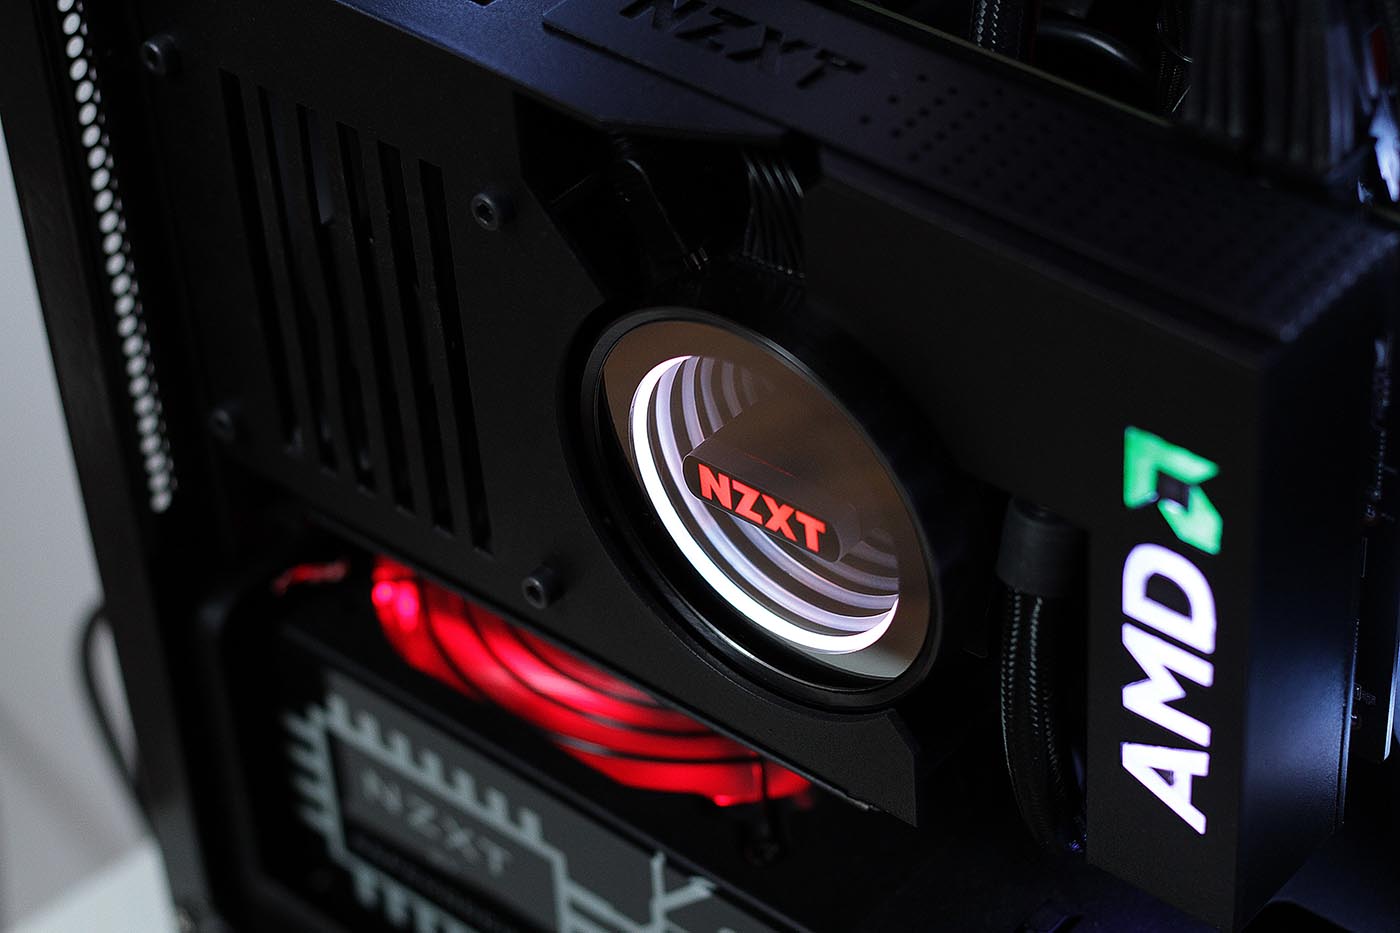 NZXT-mod-by-SS-14-small